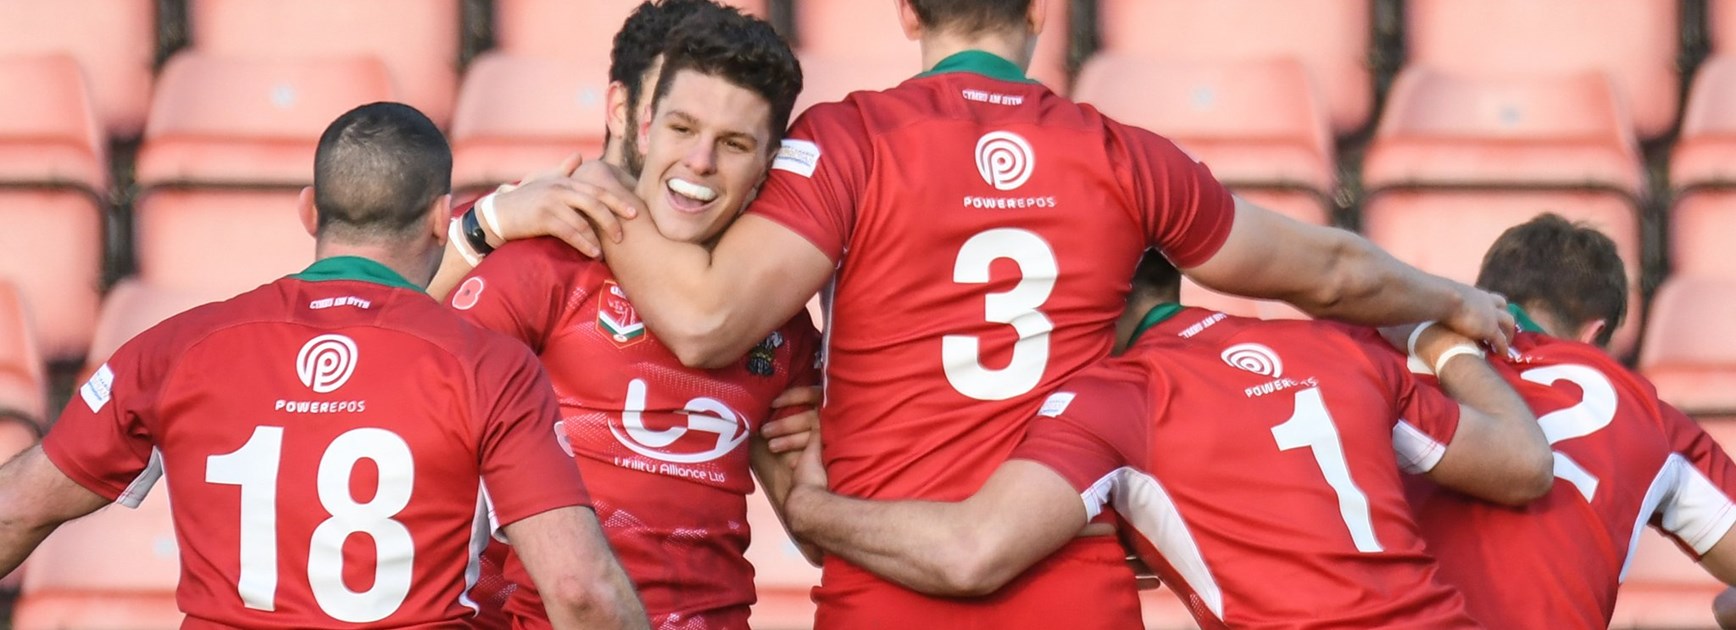 Ralph man of the match for Wales in qualification win